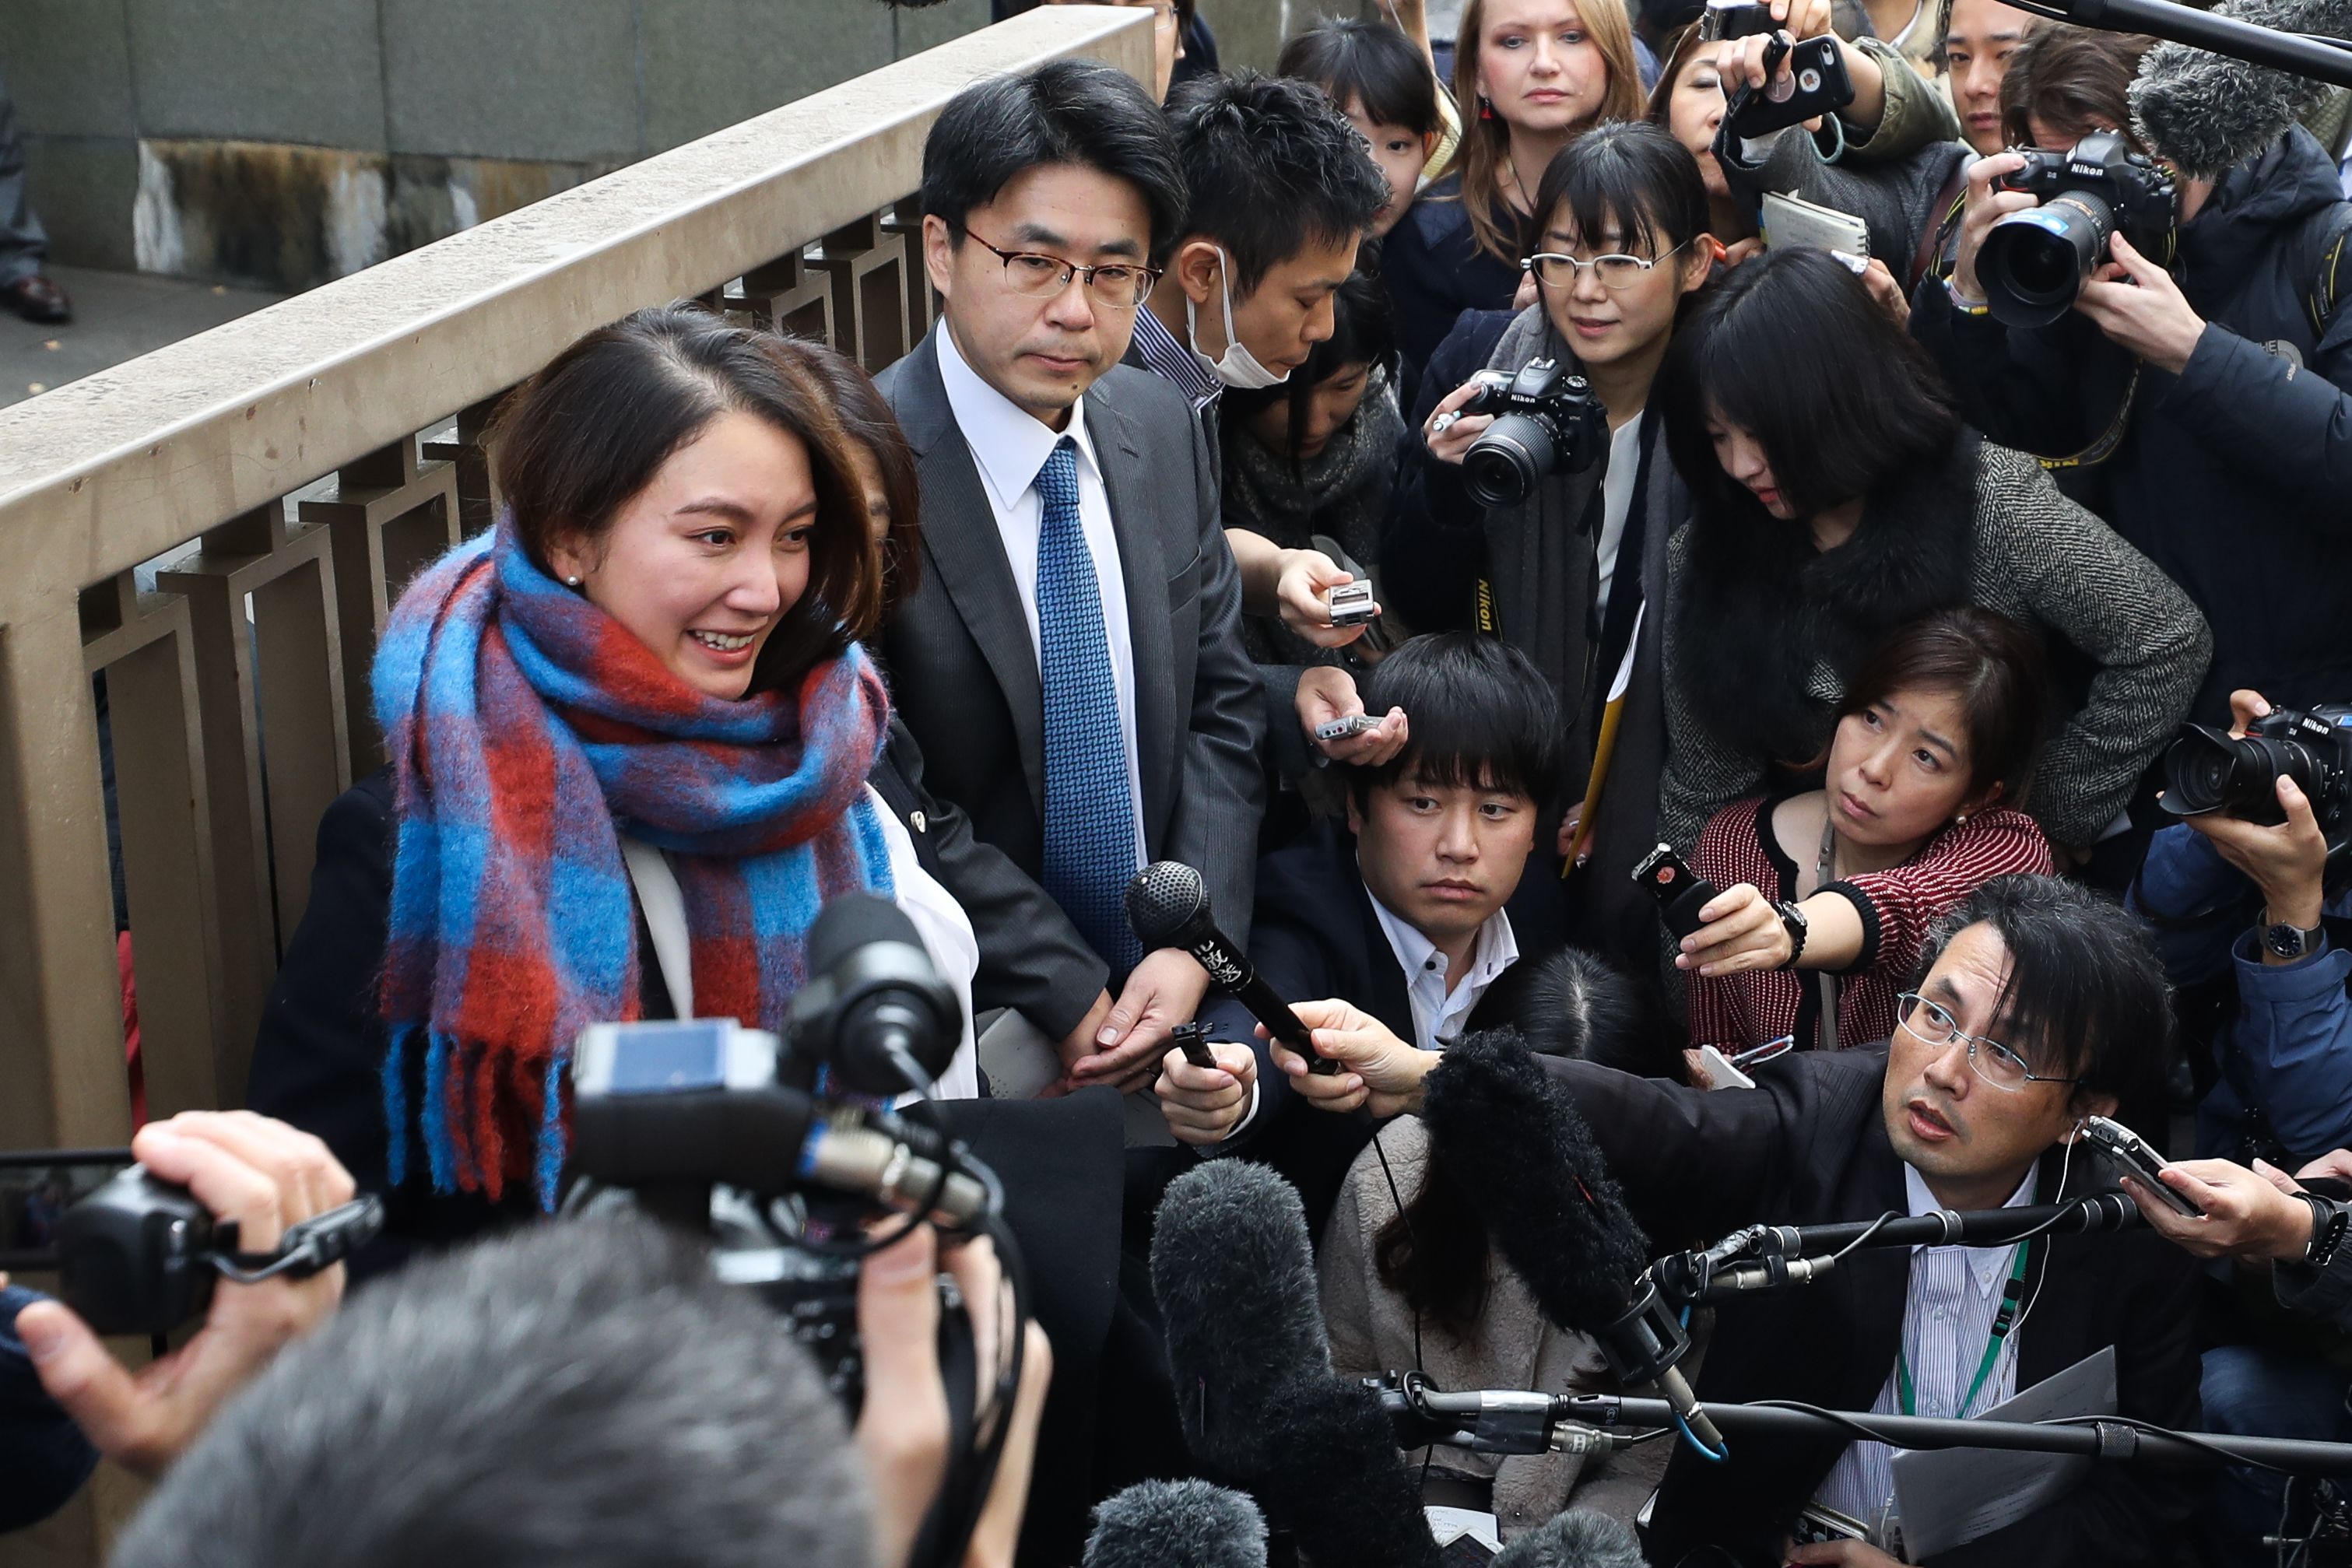 3022px x 2015px - Shiori Ito won civil case against her alleged rapist. But Japan's rape laws  need overhaul, campaigners say | CNN